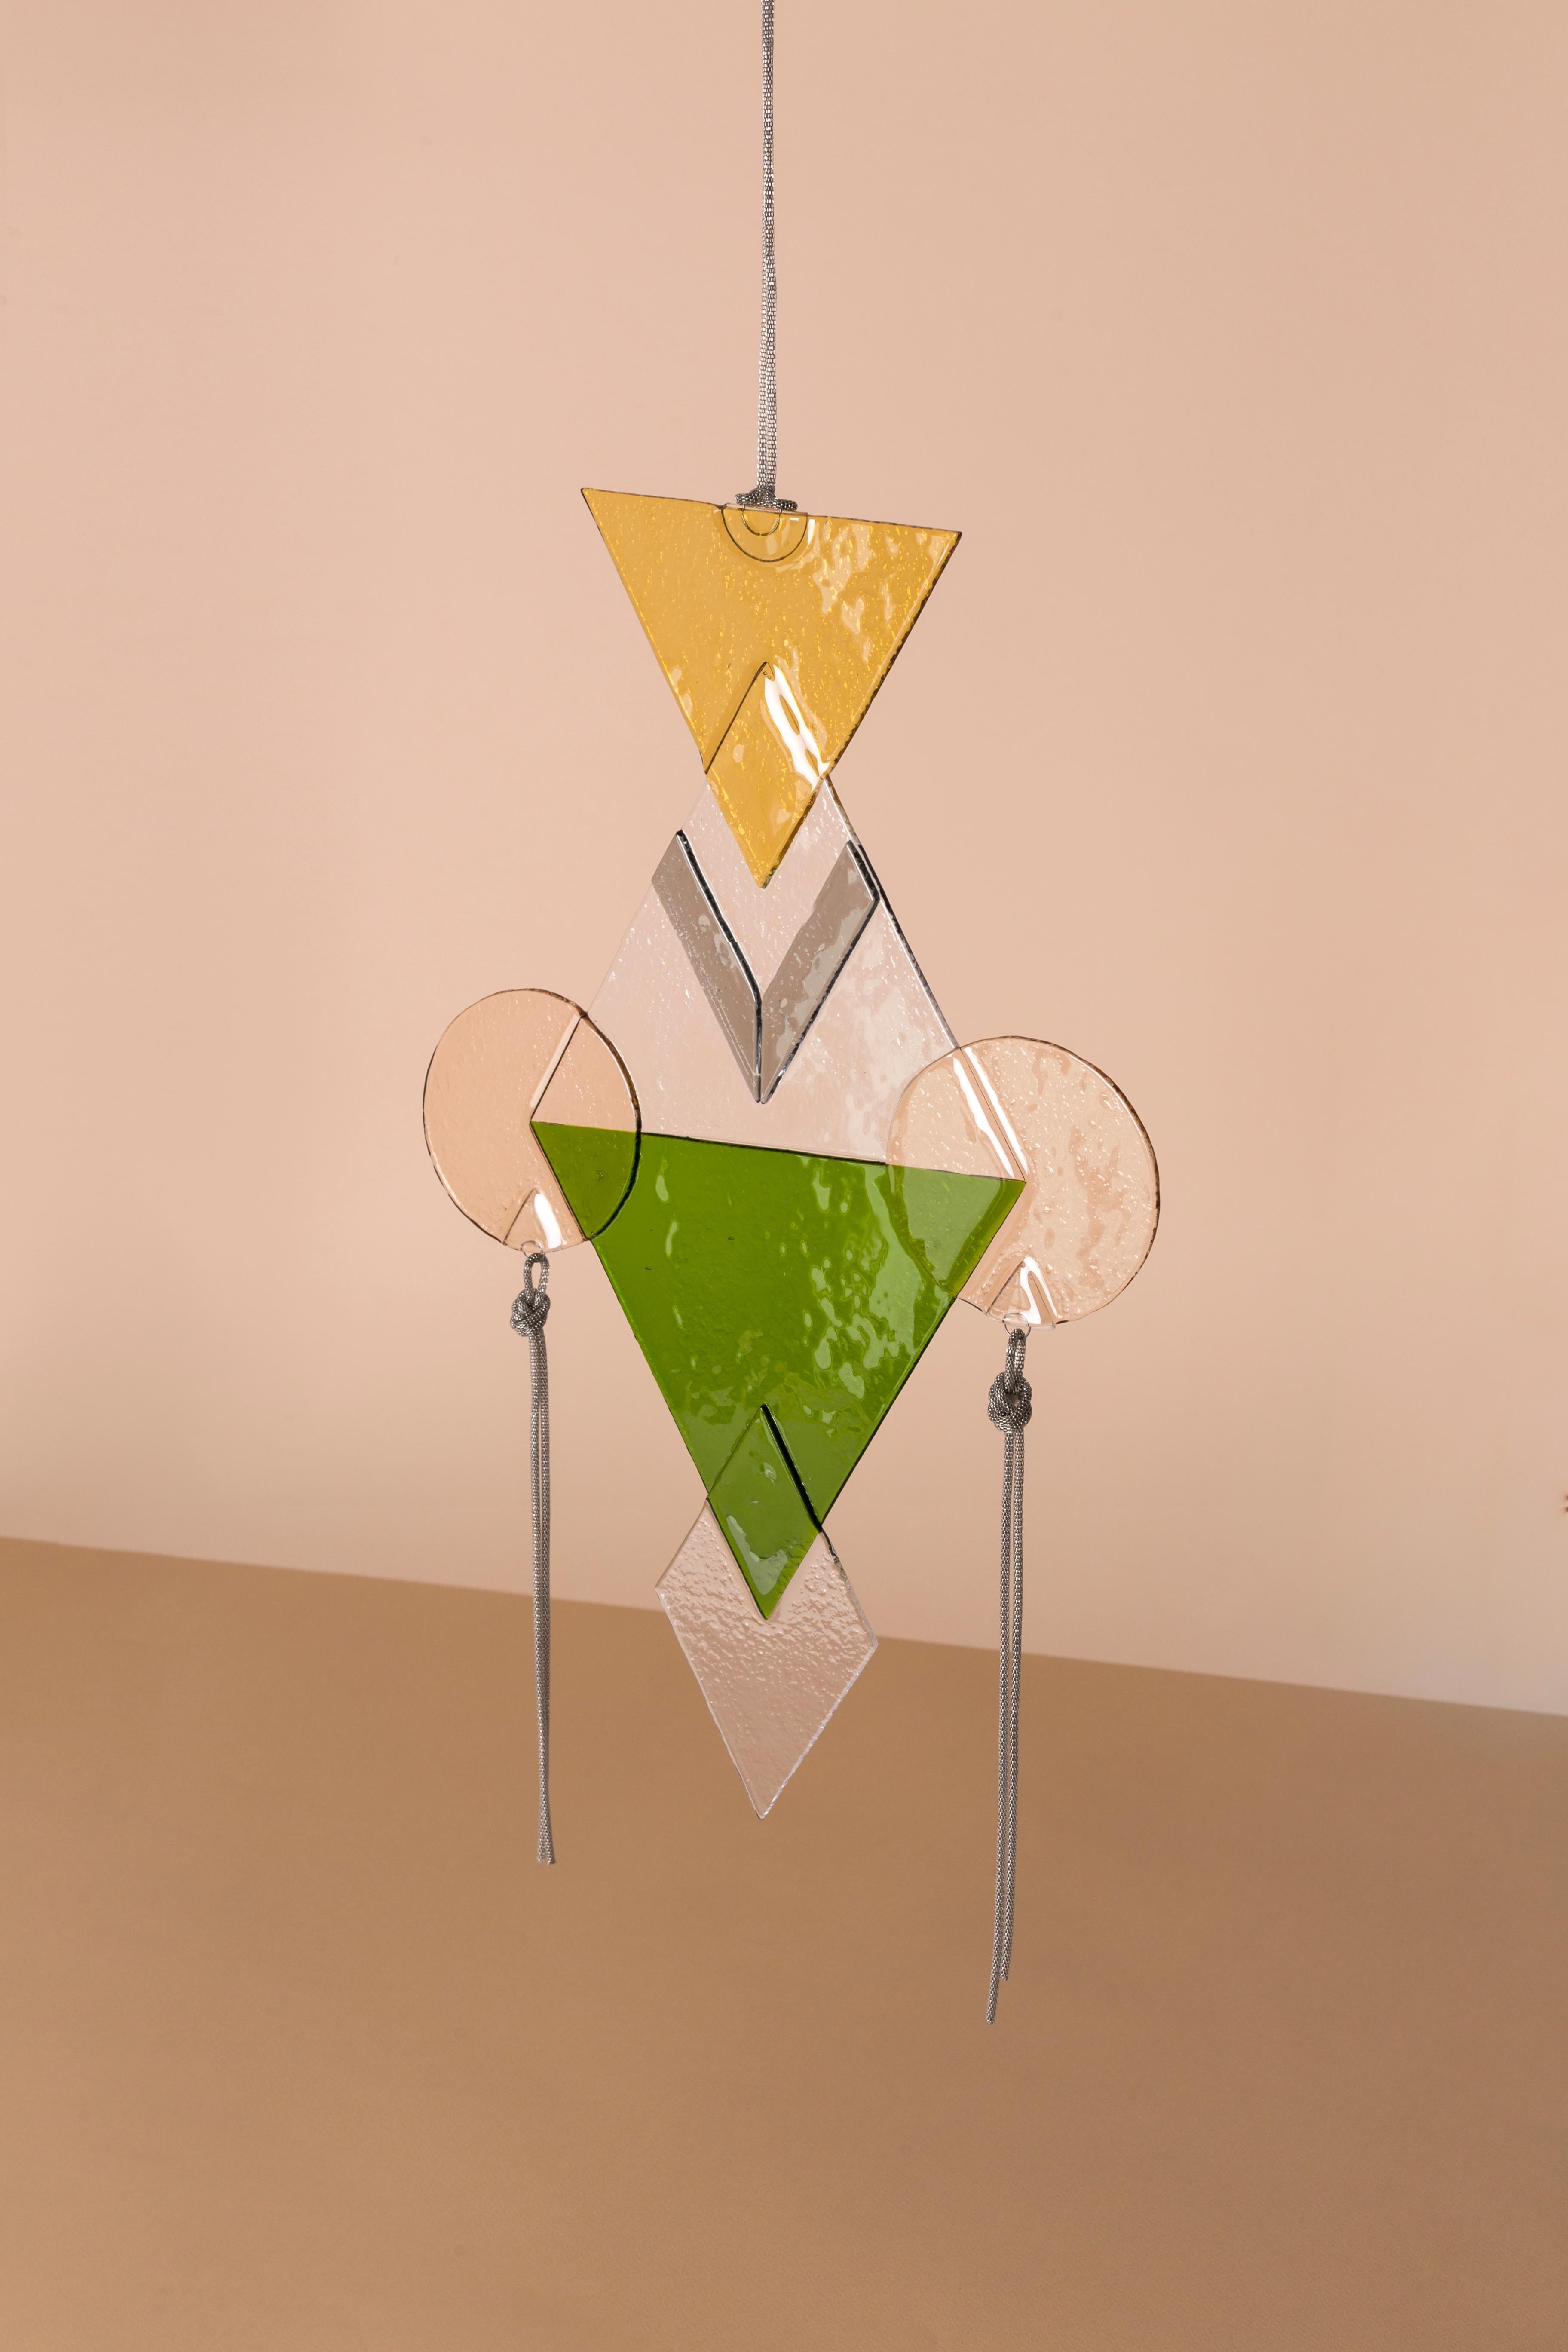 Mojo Amulet Silver by Serena Confalonieri
Dimensions: 30 x 48 x 1 cm
Materials: Glass fusion, decorative aluminum chains
Glass colors: Transparent, yellow, grey, pink, green
Chain color: Silver

Artisanal glass fusion with decorative aluminium